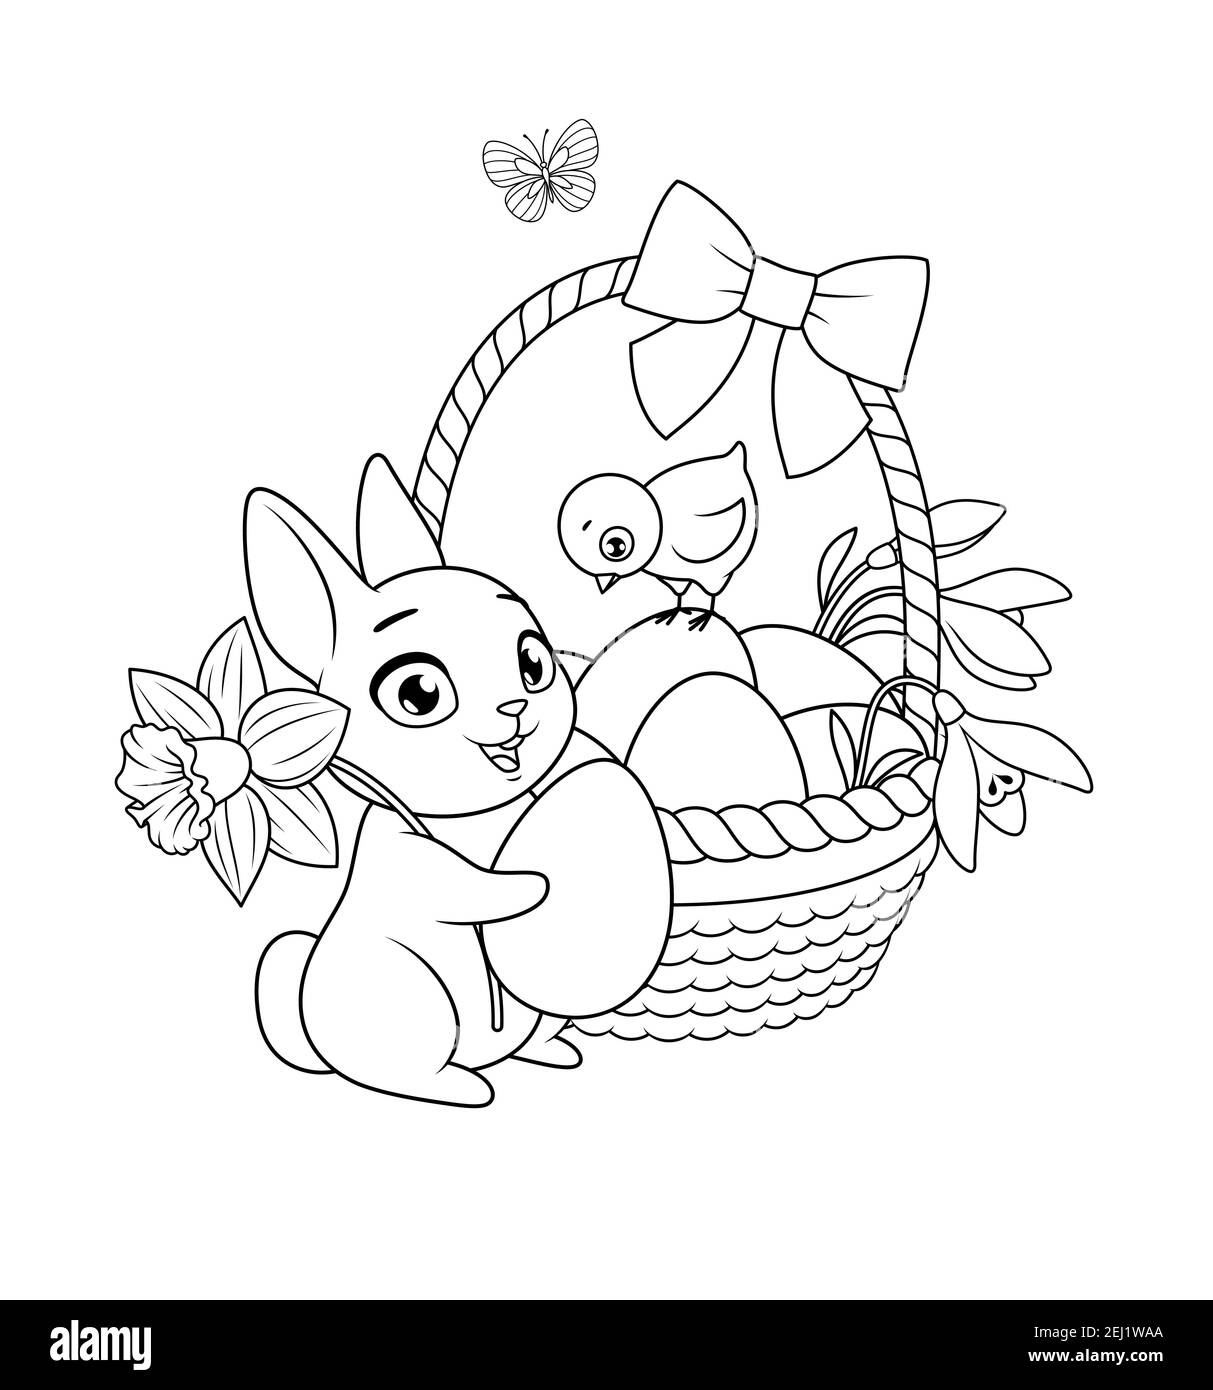 Easter bunny and chick with basket full of eggs and flowers. Vector black and white illustration for coloring book page. Stock Vector